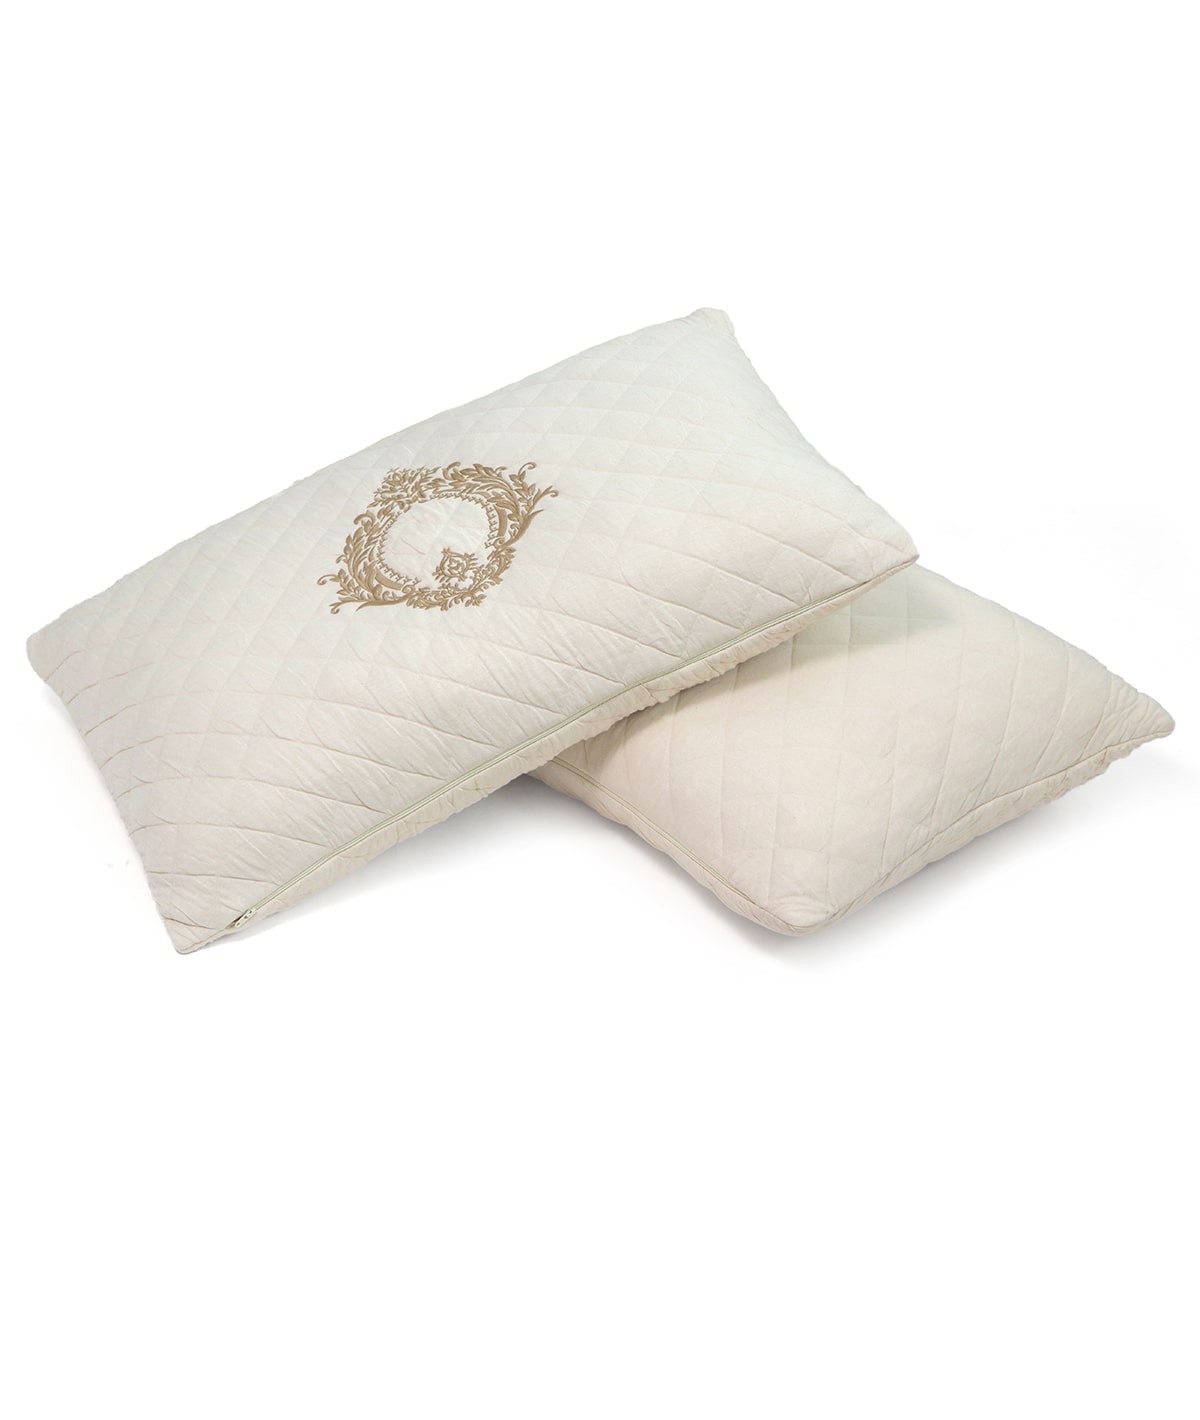 buy online bedcovers set with pillow covers